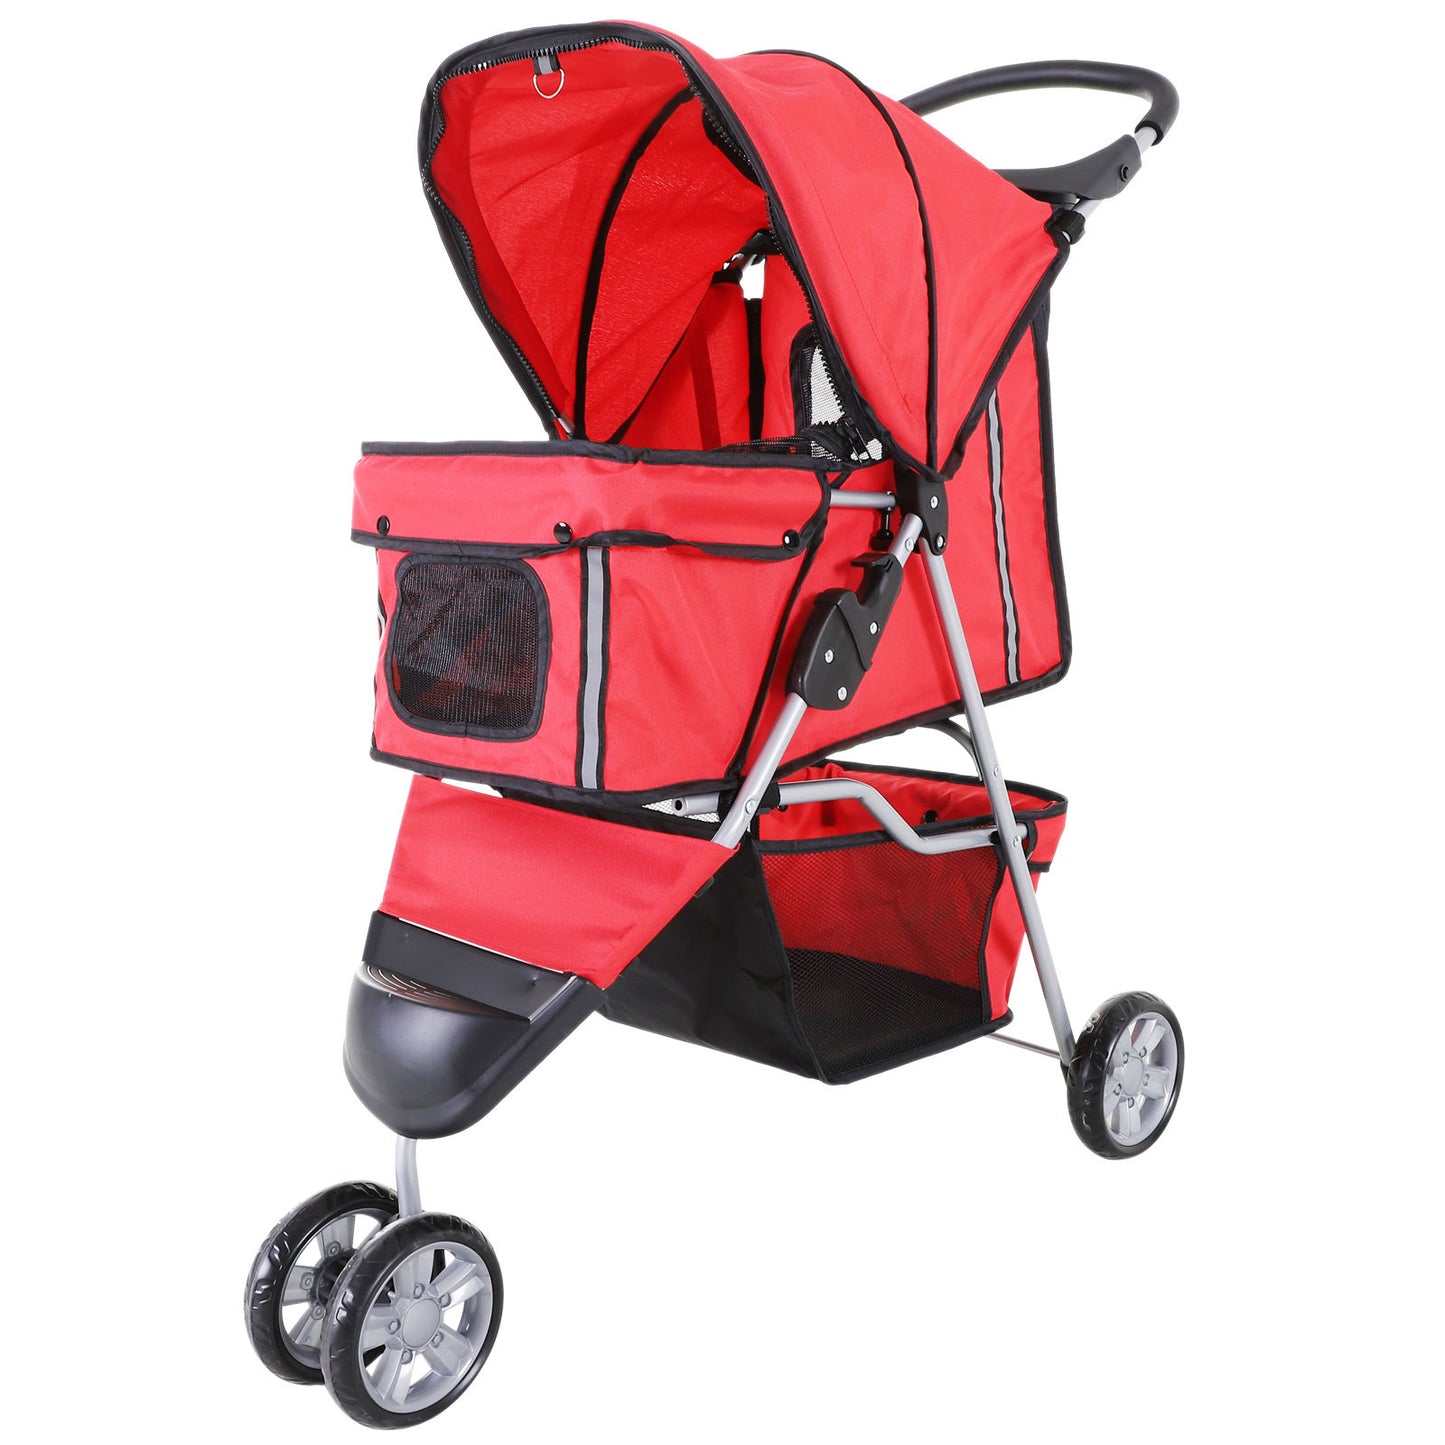 Nancy's The Garden Dog buggy dogs cats multicolored (red)